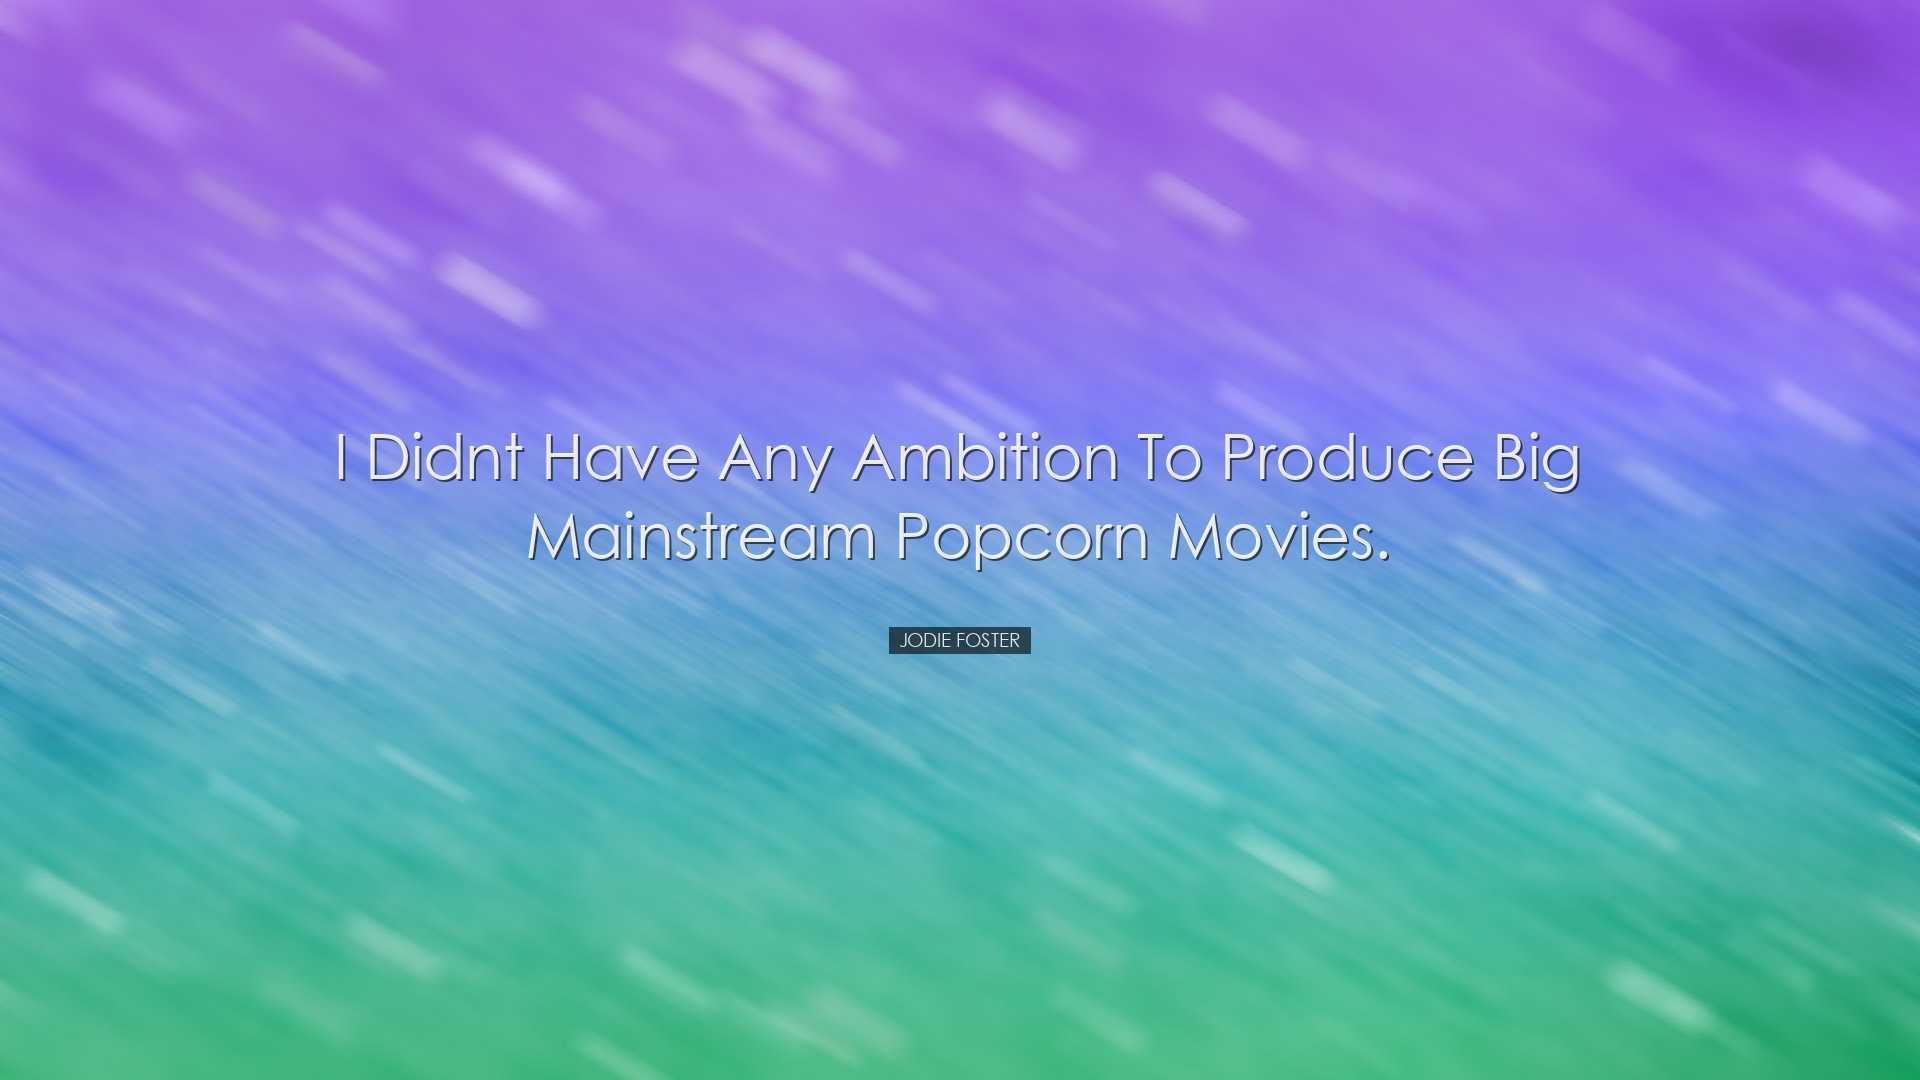 I didnt have any ambition to produce big mainstream popcorn movies